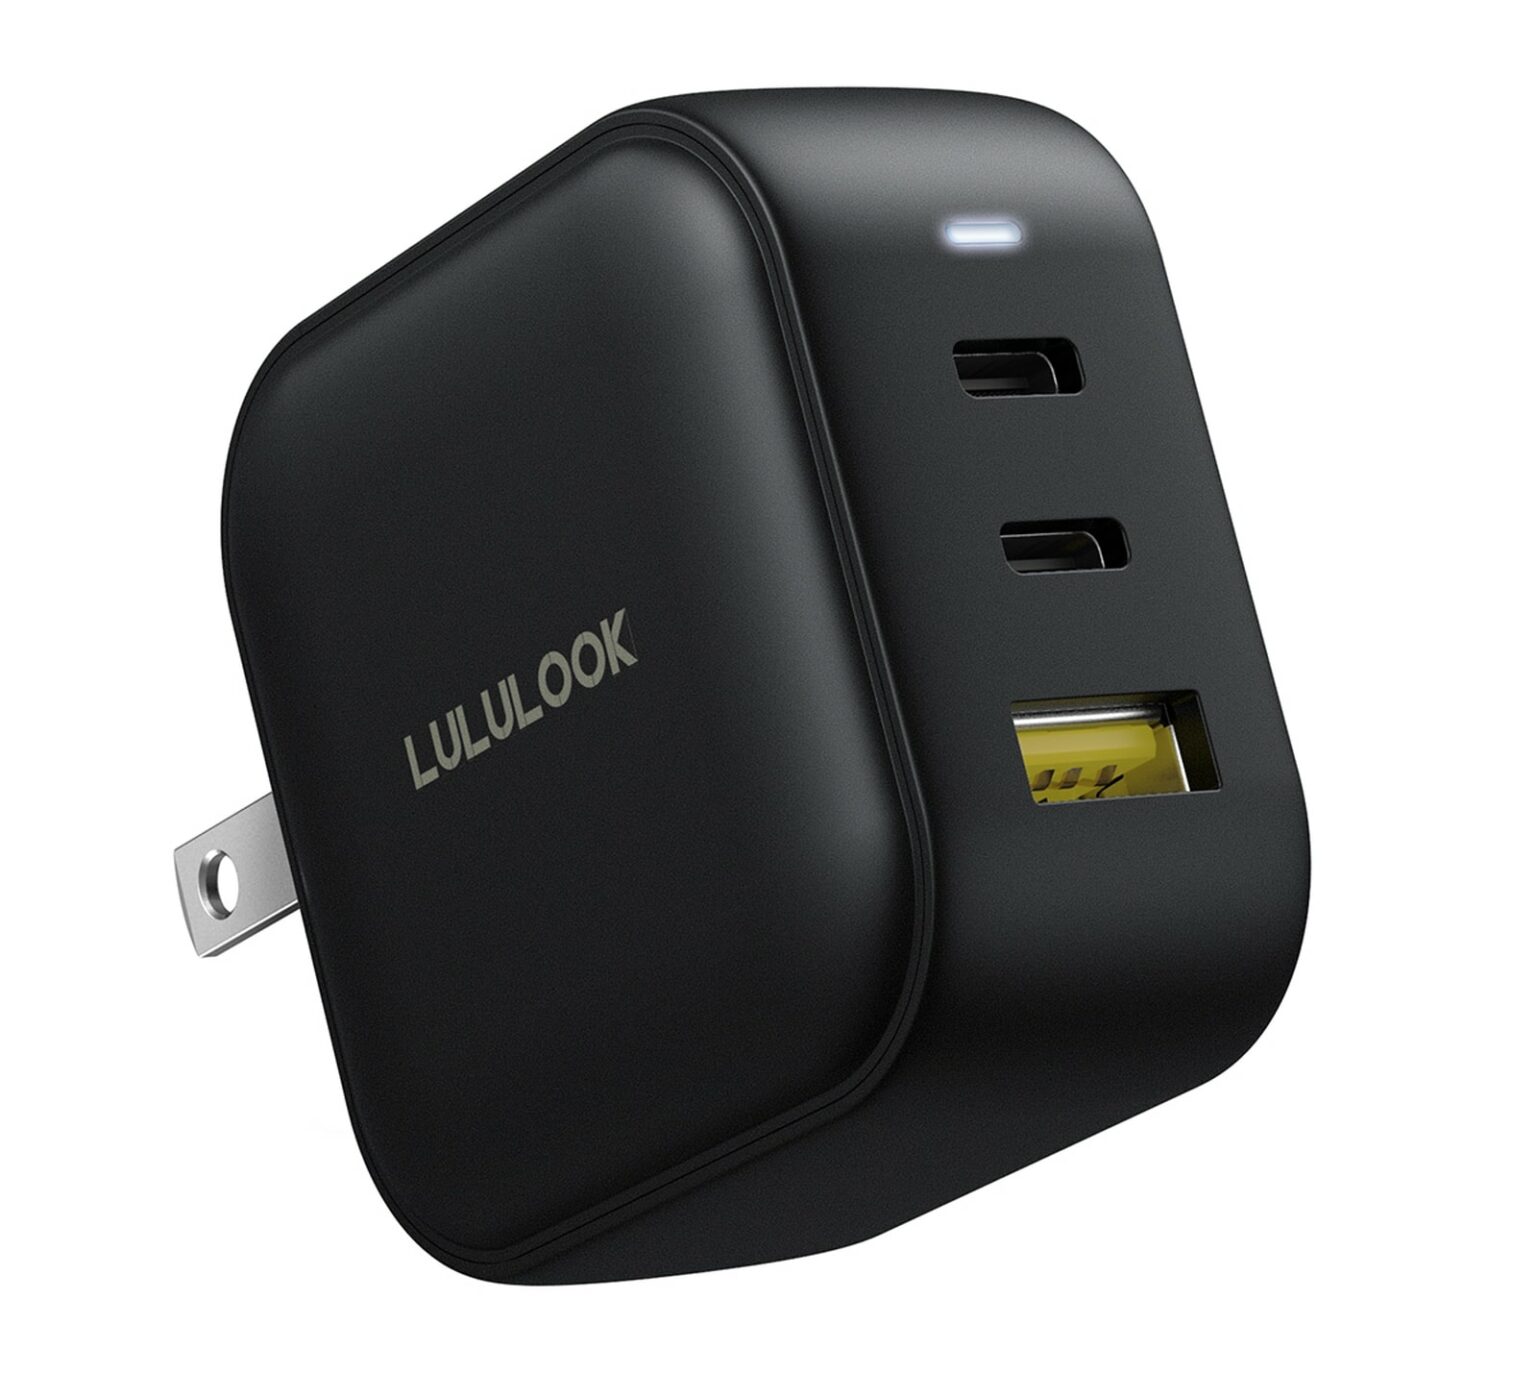 Lululook 65W USB-C GaN Charger: With three ports, this is a great charger for anyone using multiple devices at once.